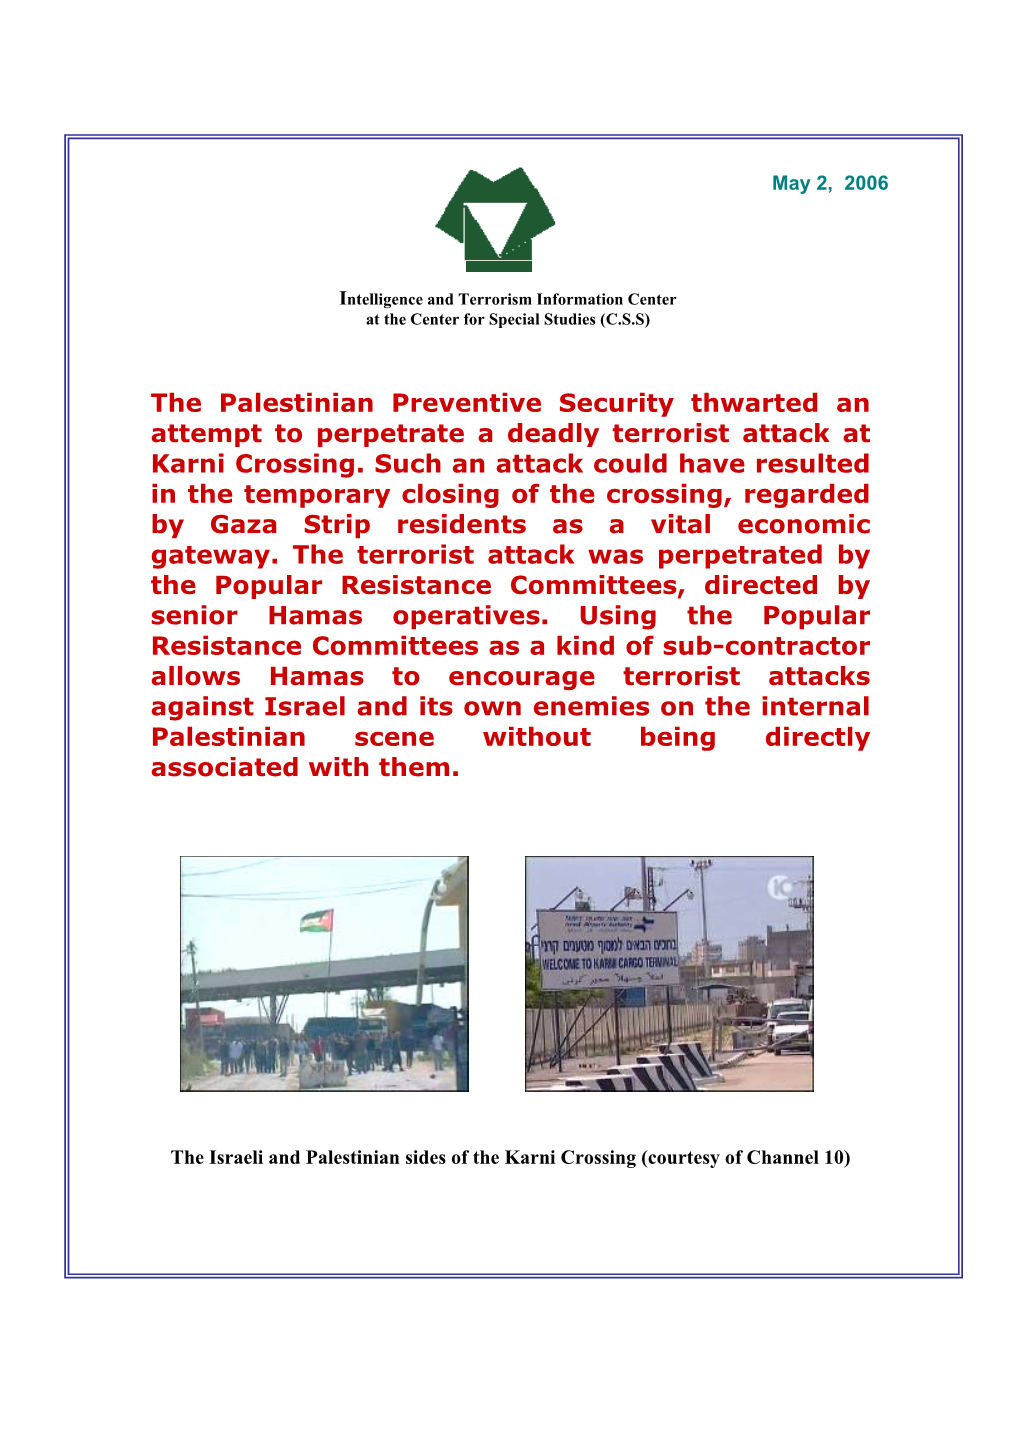 The Palestinian Preventive Security Thwarted an Attempt to Perpetrate a Deadly Terrorist Attack at Karni Crossing